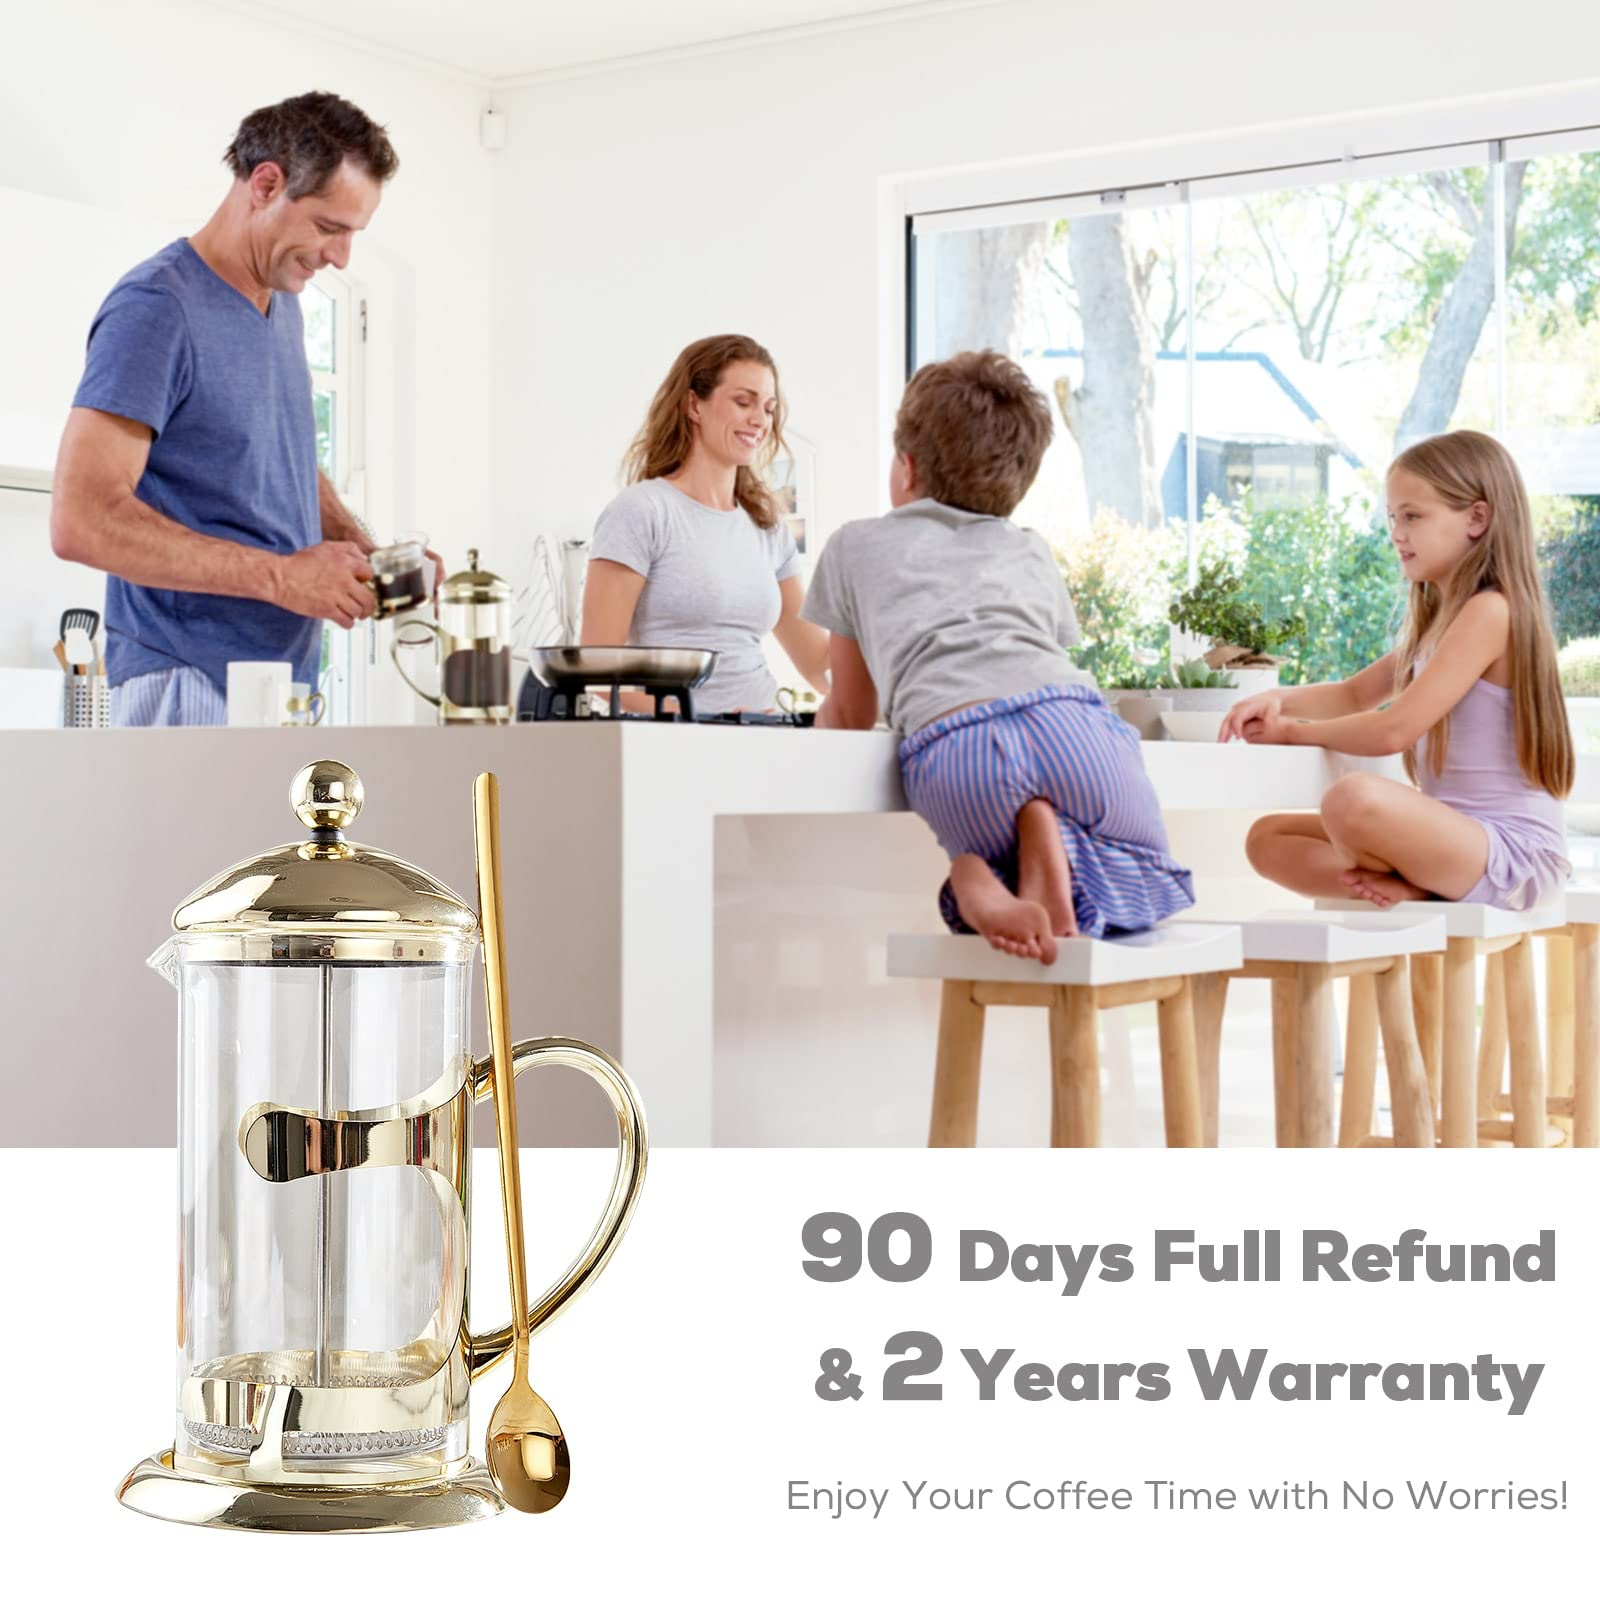 Premium Gold French Press Coffee Maker - 4-Level Filter - Long Spoon - Large